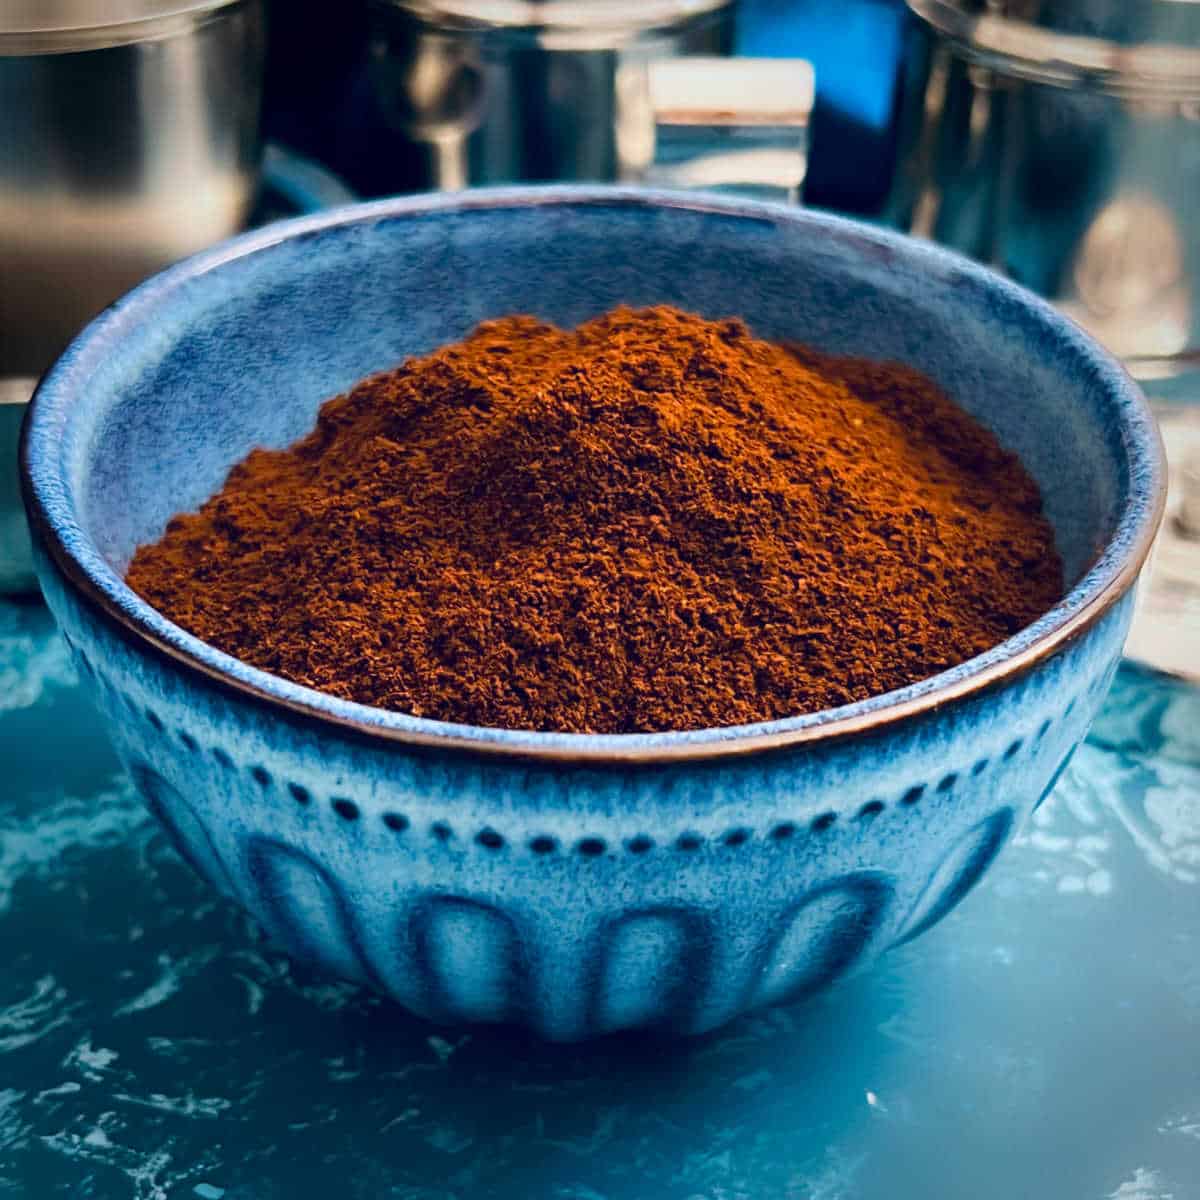 Ground coffee placed in a blue bowl.